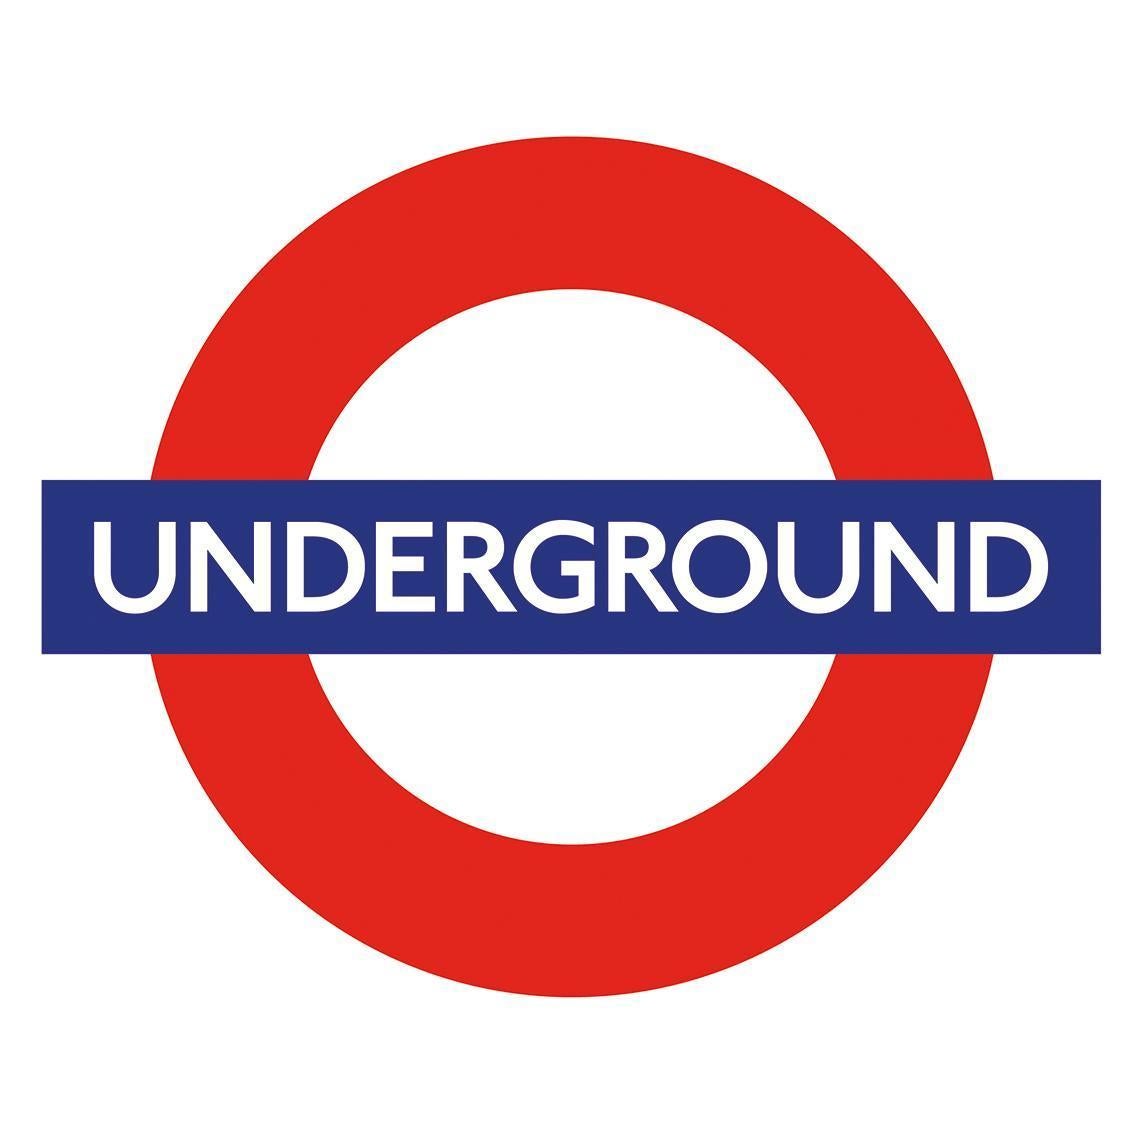 The new font on the London Underground logo